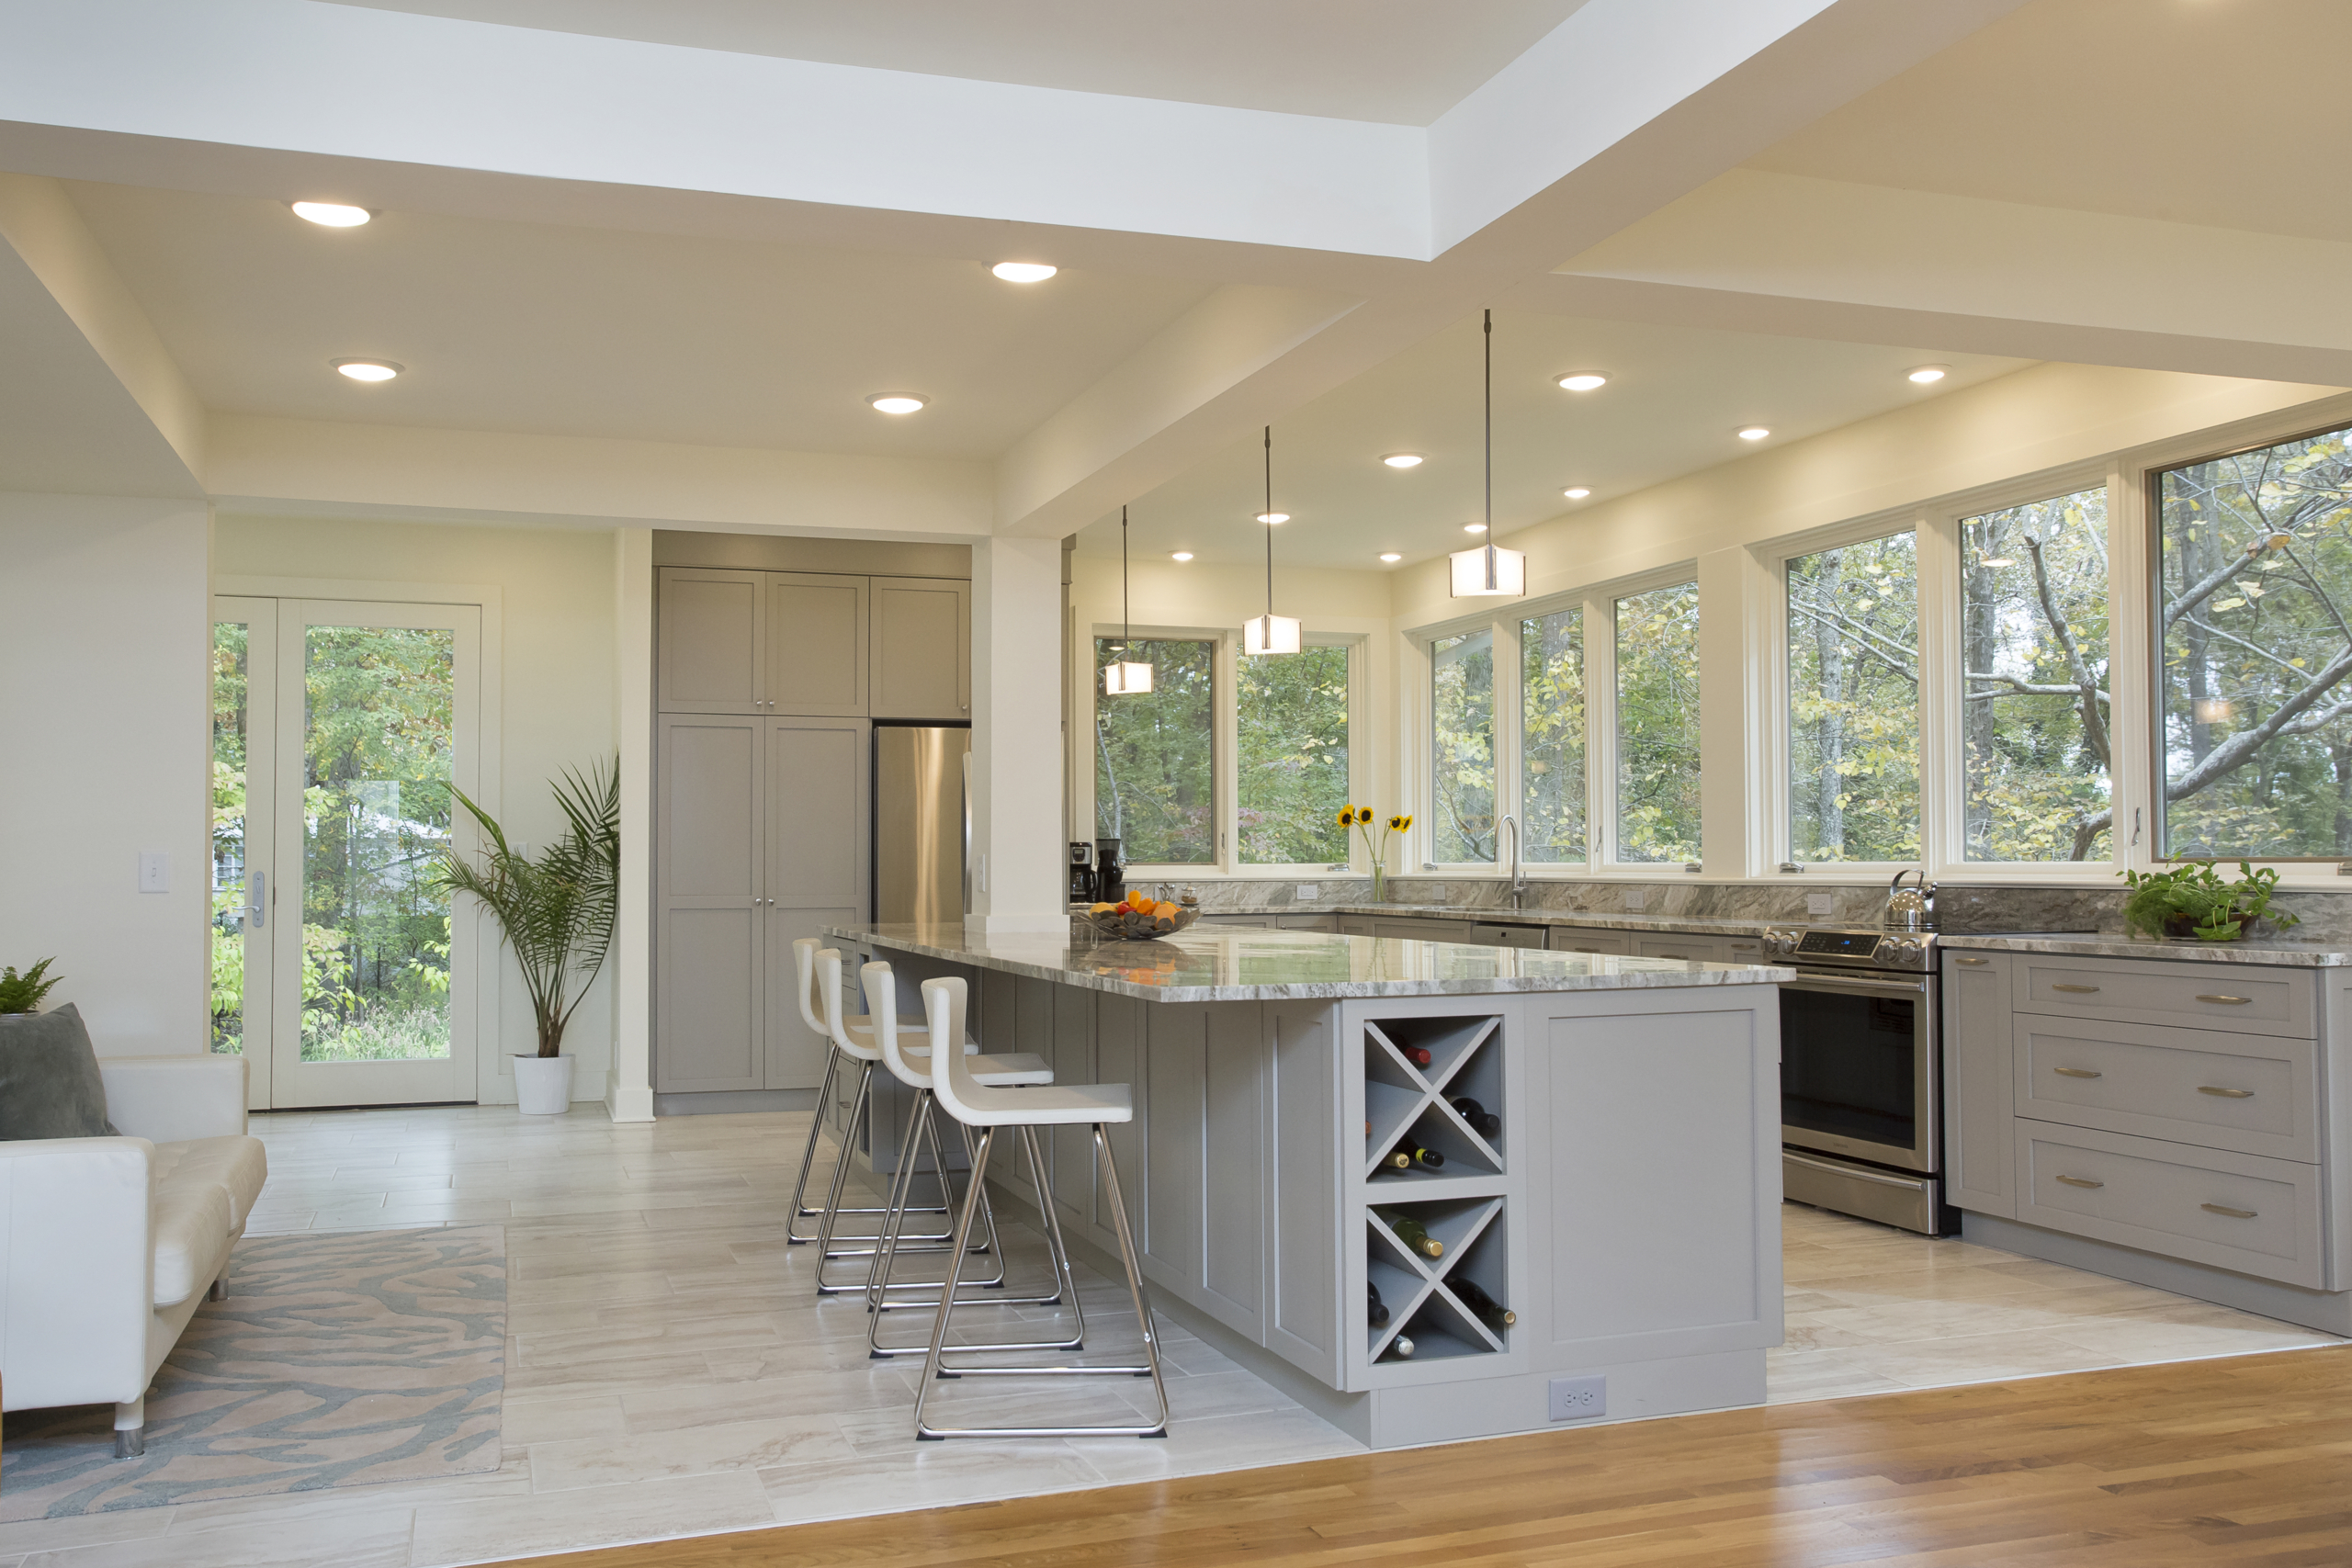 A bright, contemporary and sophisticated kitchen with a large island, generous counter space, built-in wine storage and band of windows overlooking a lush green site